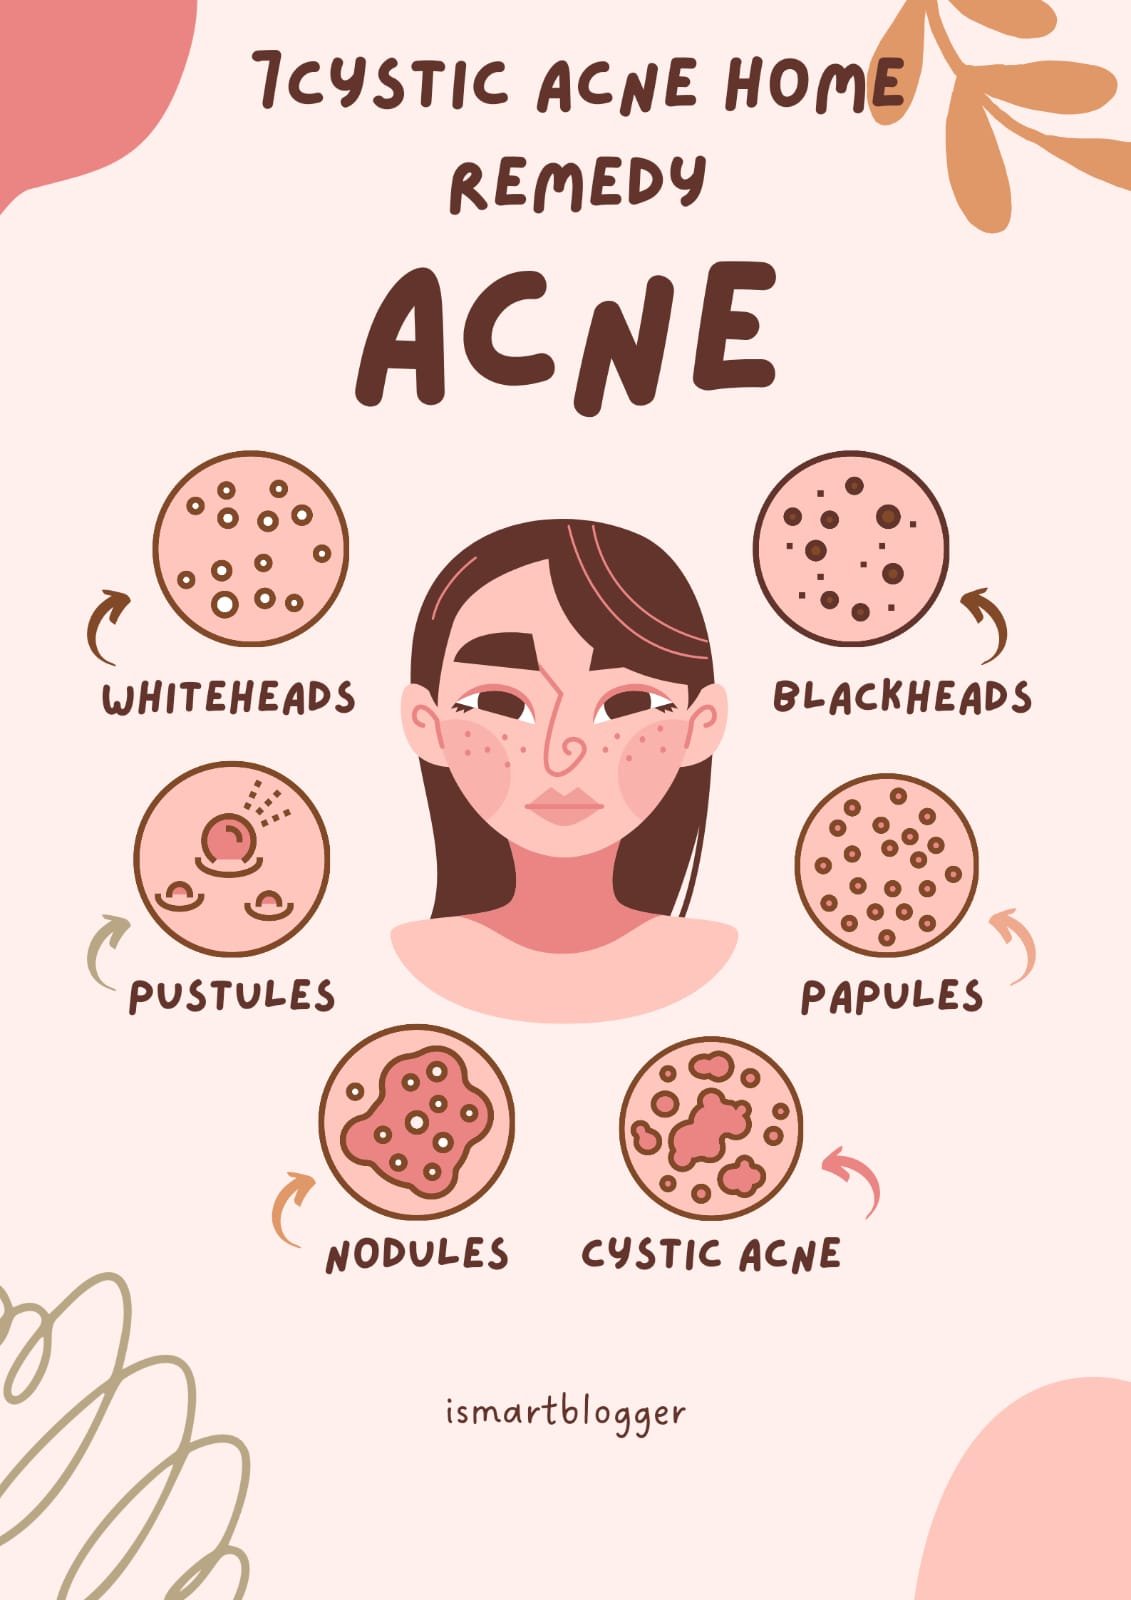 7 cystic acne home remedy